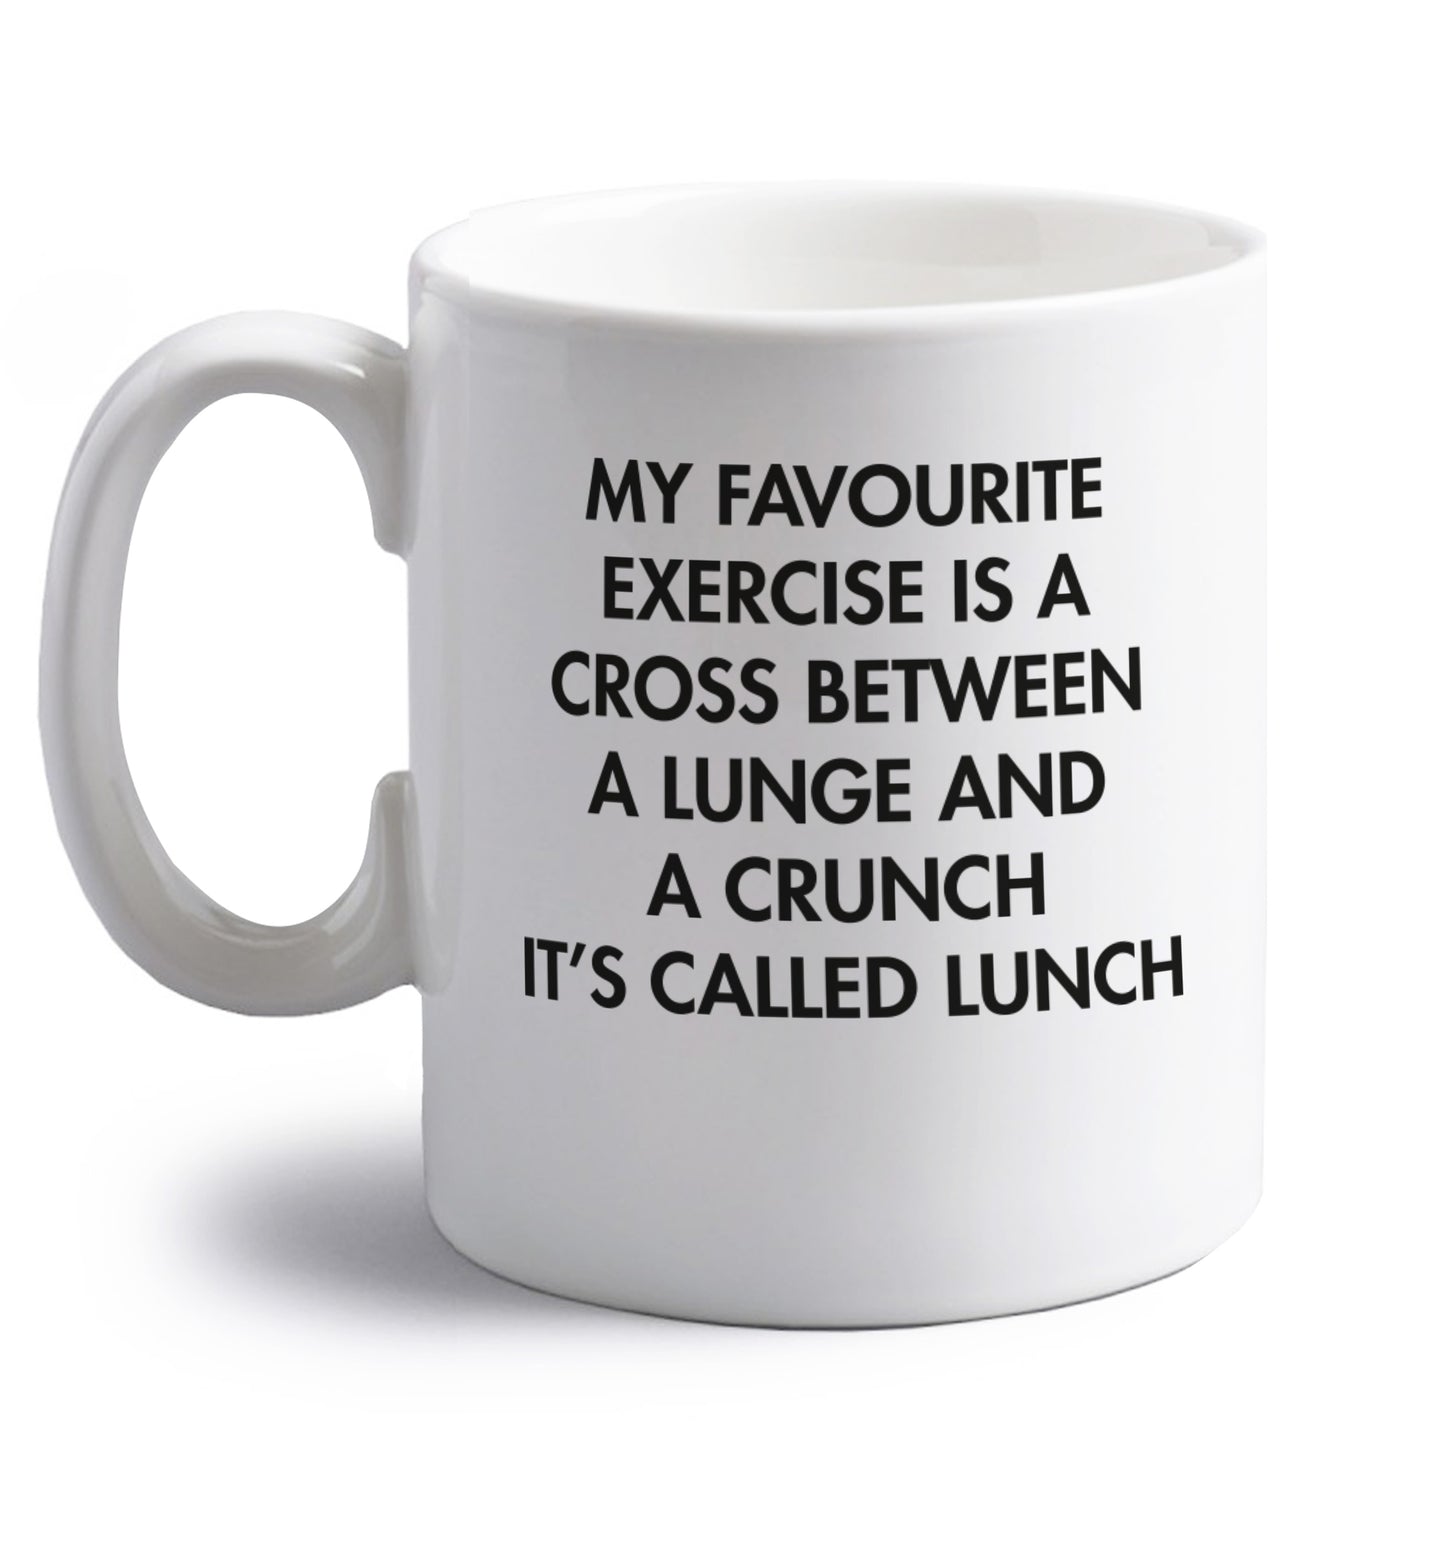 My favourite exercise is a cross between a lung and a crunch it's called lunch right handed white ceramic mug 